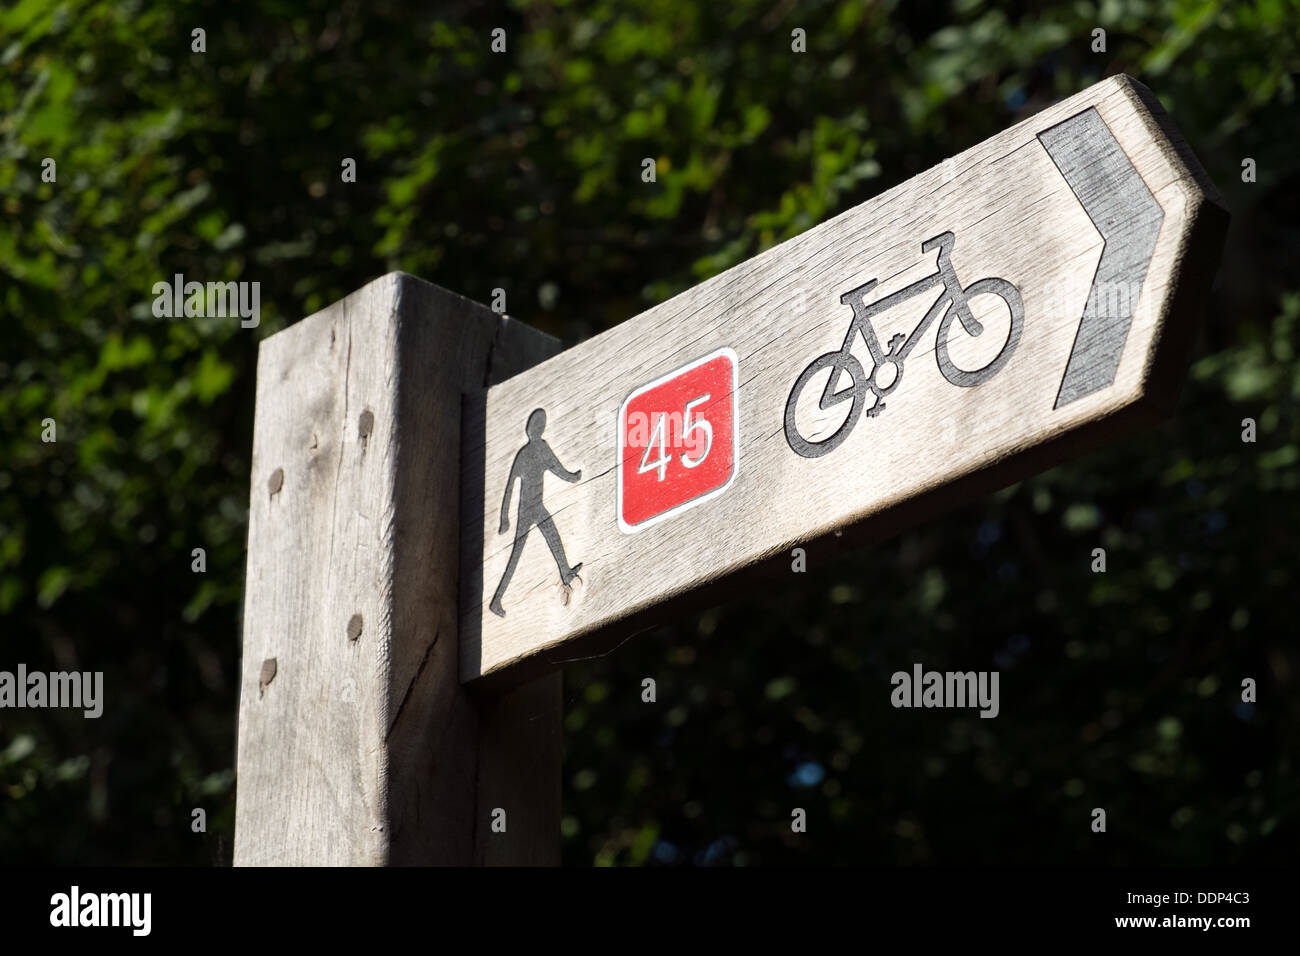 A Wooden UK National cycle route sign showing the direction of th path, depicting a bicycle, a walker and the number 45 Stock Photo